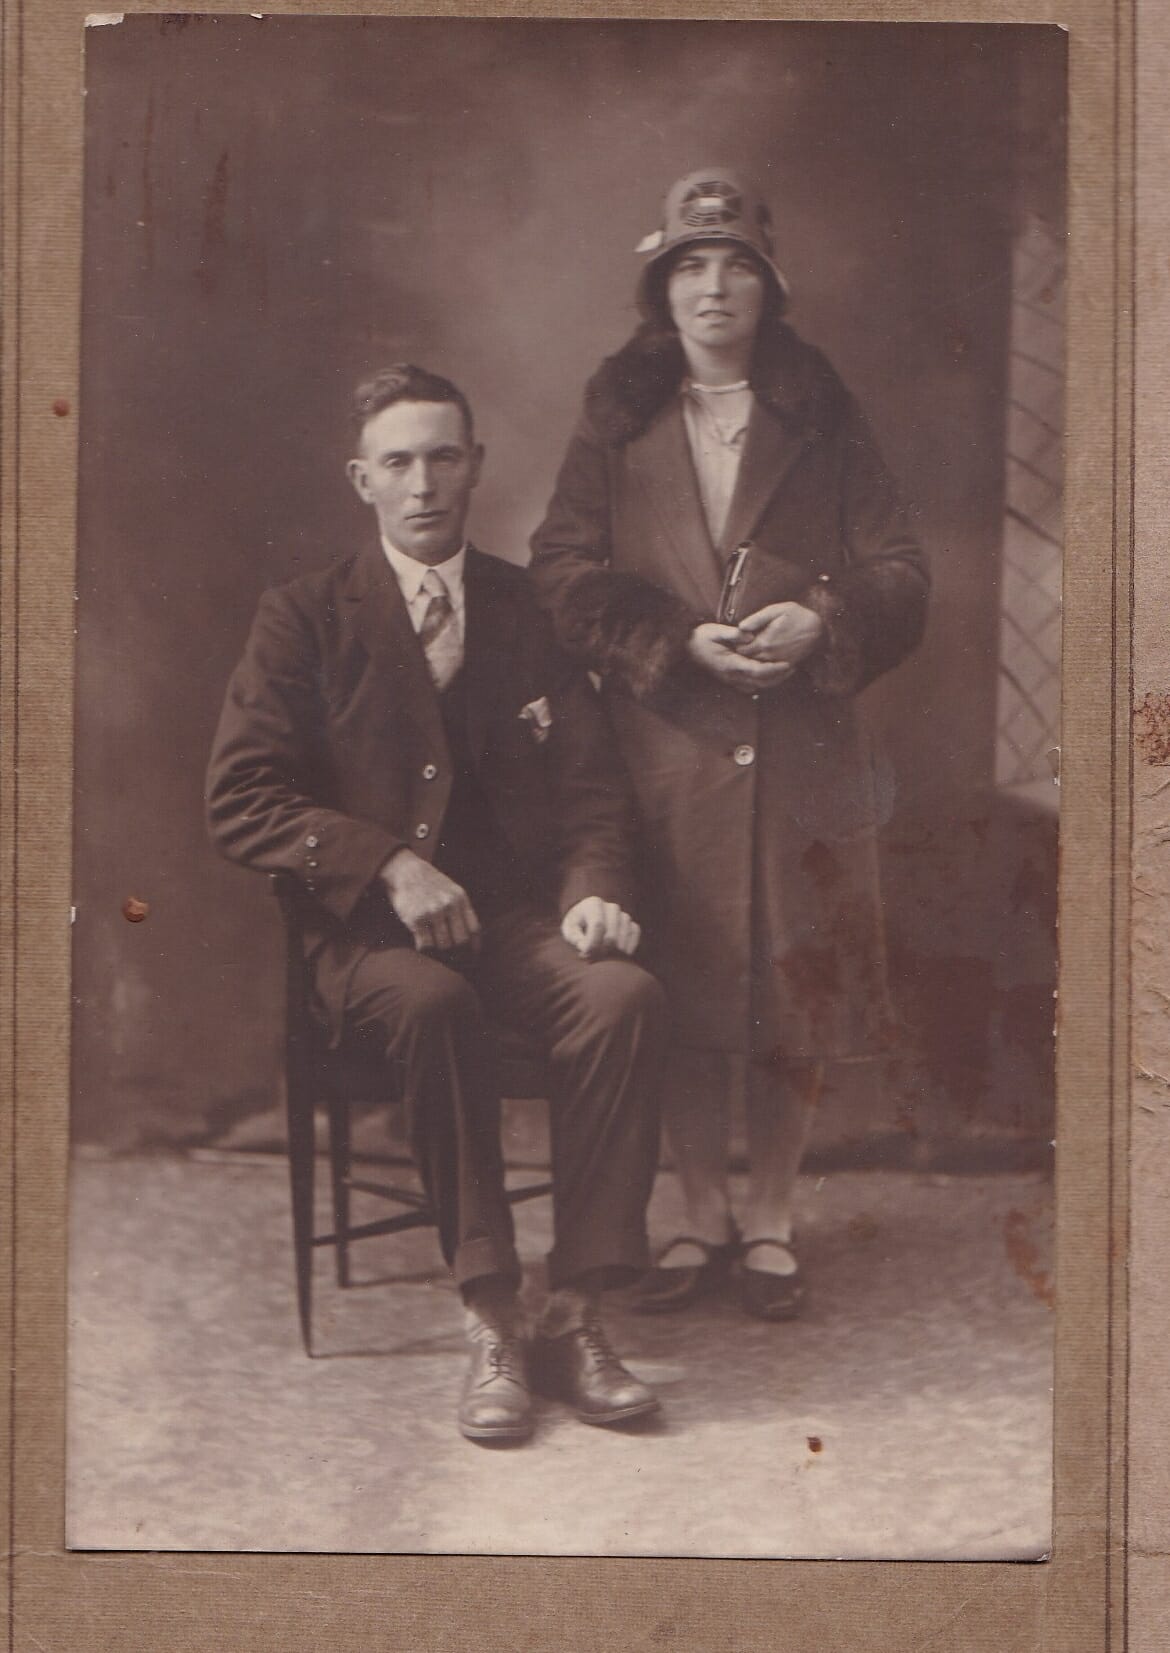 Johnnie (Francis) Bradley and his wife Annie (Monaghan)